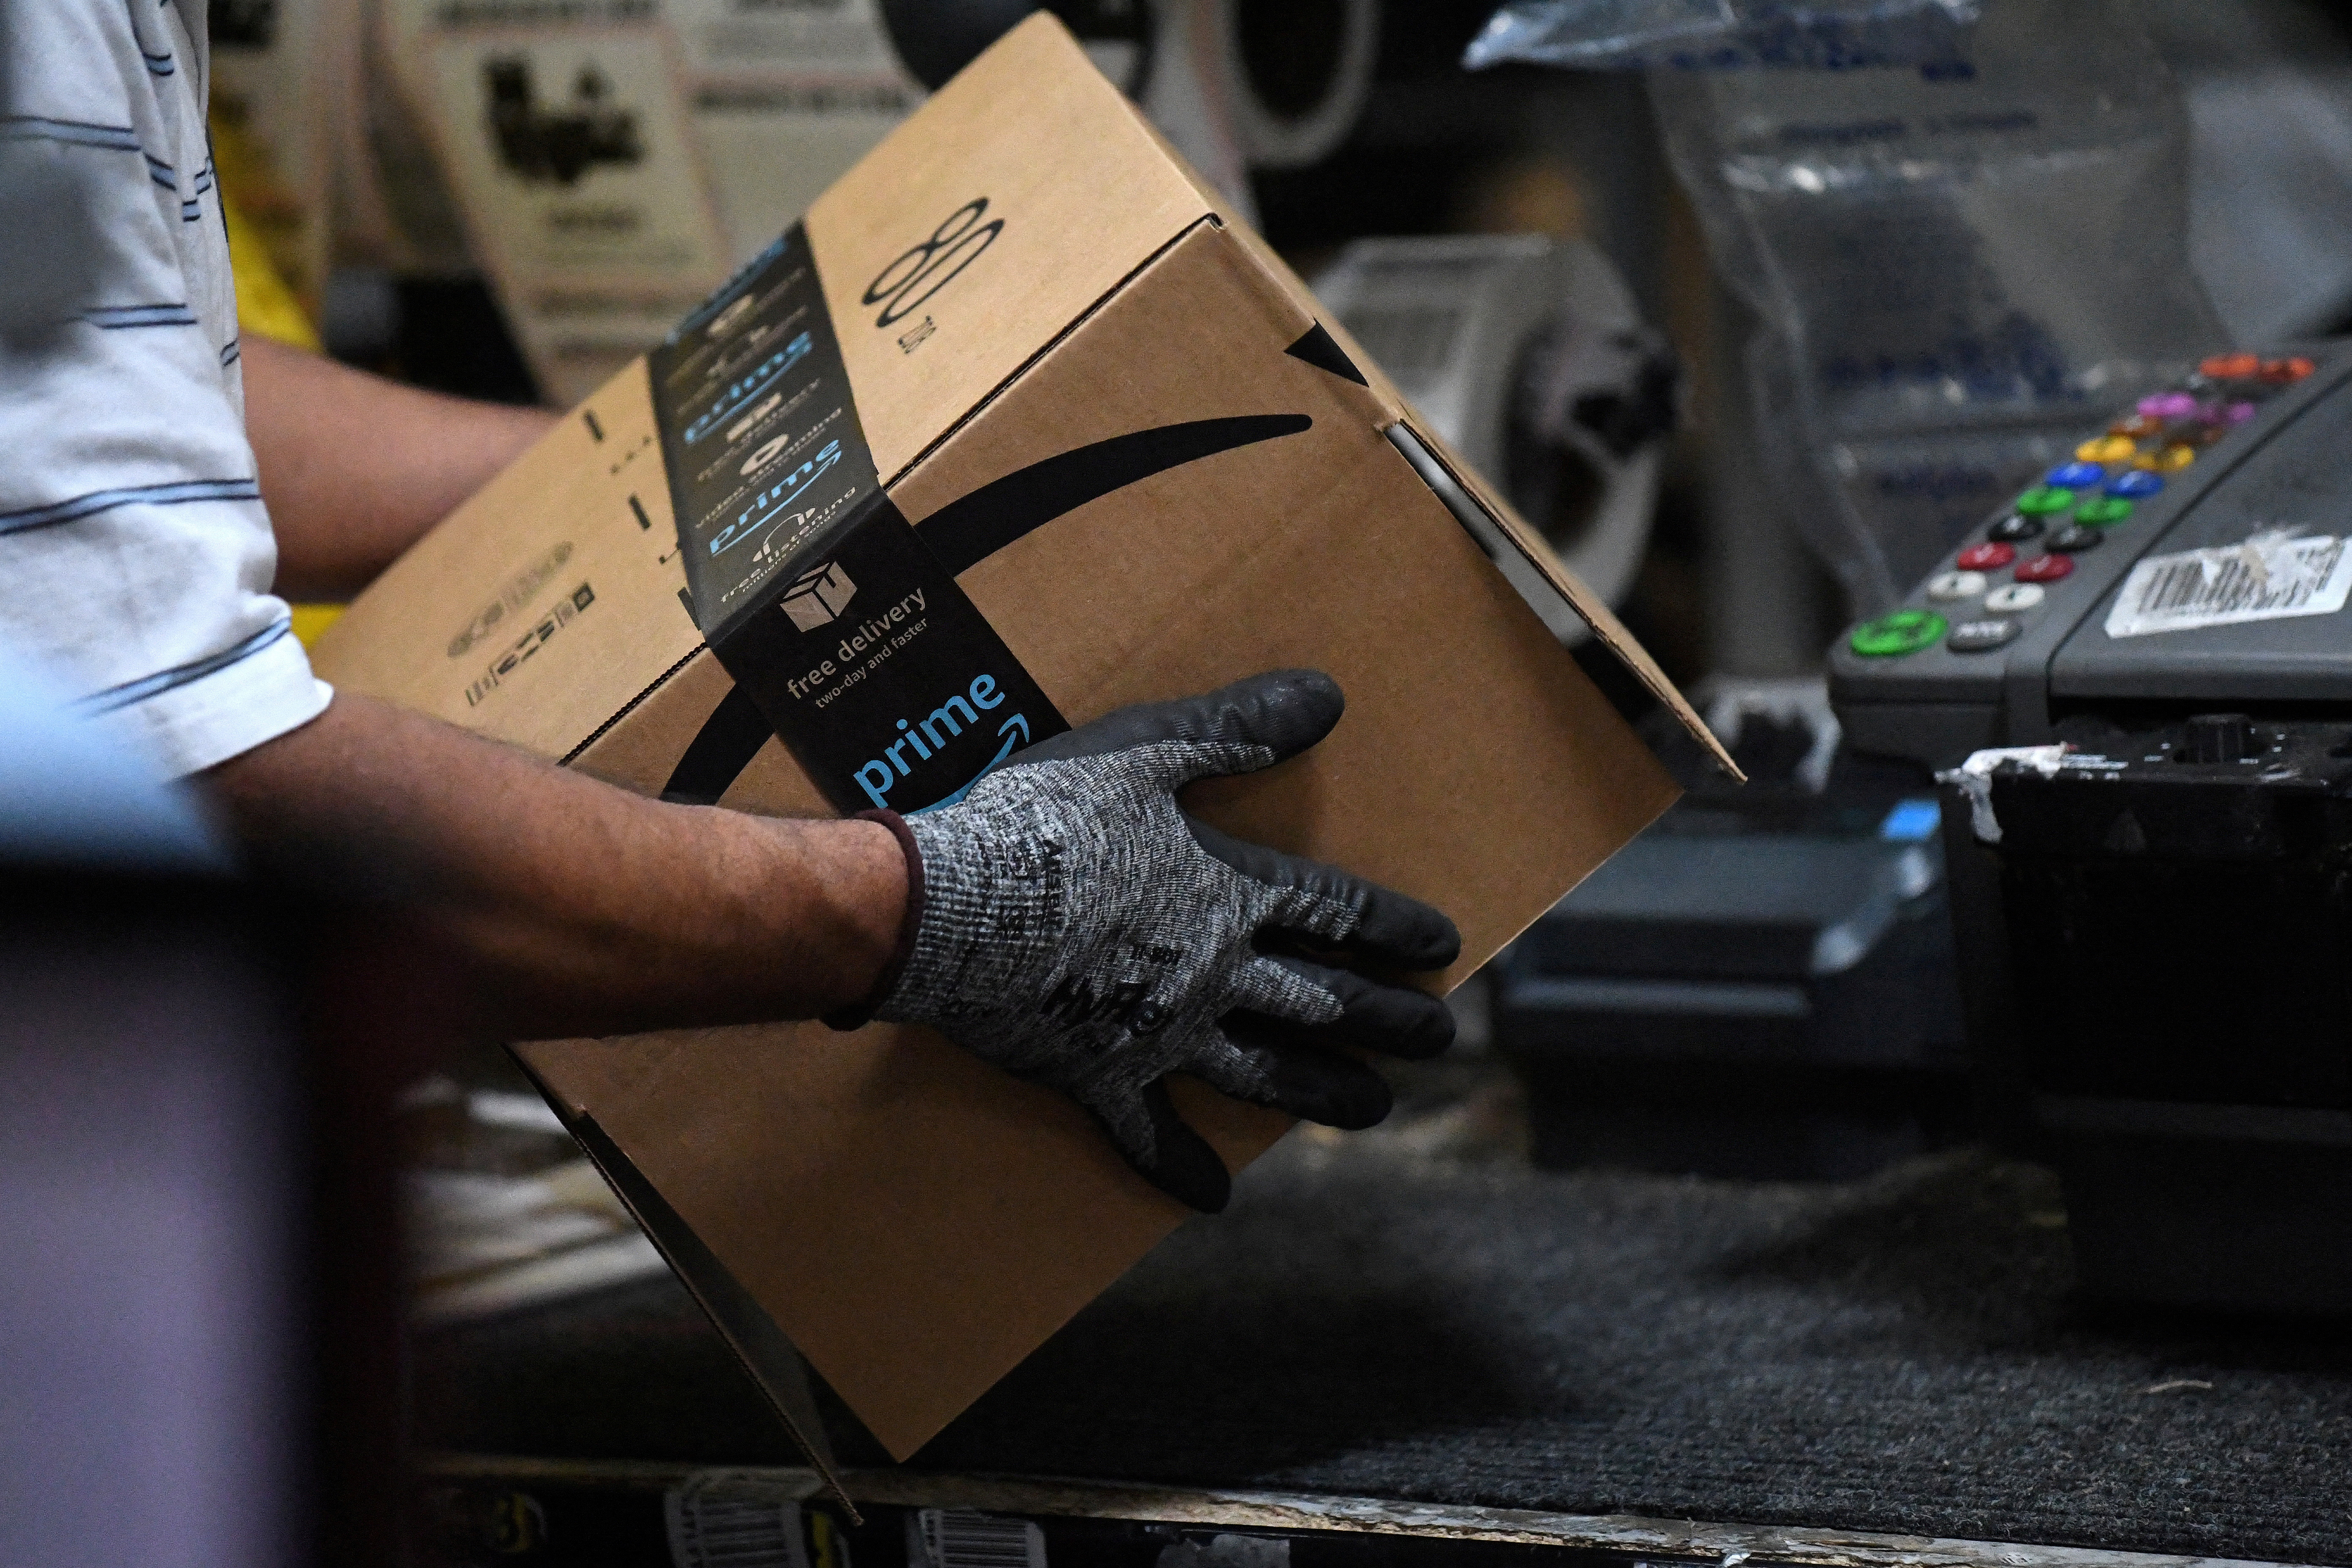 Worker assembles a box for delivery at the Amazon fulfilment center in Baltimore